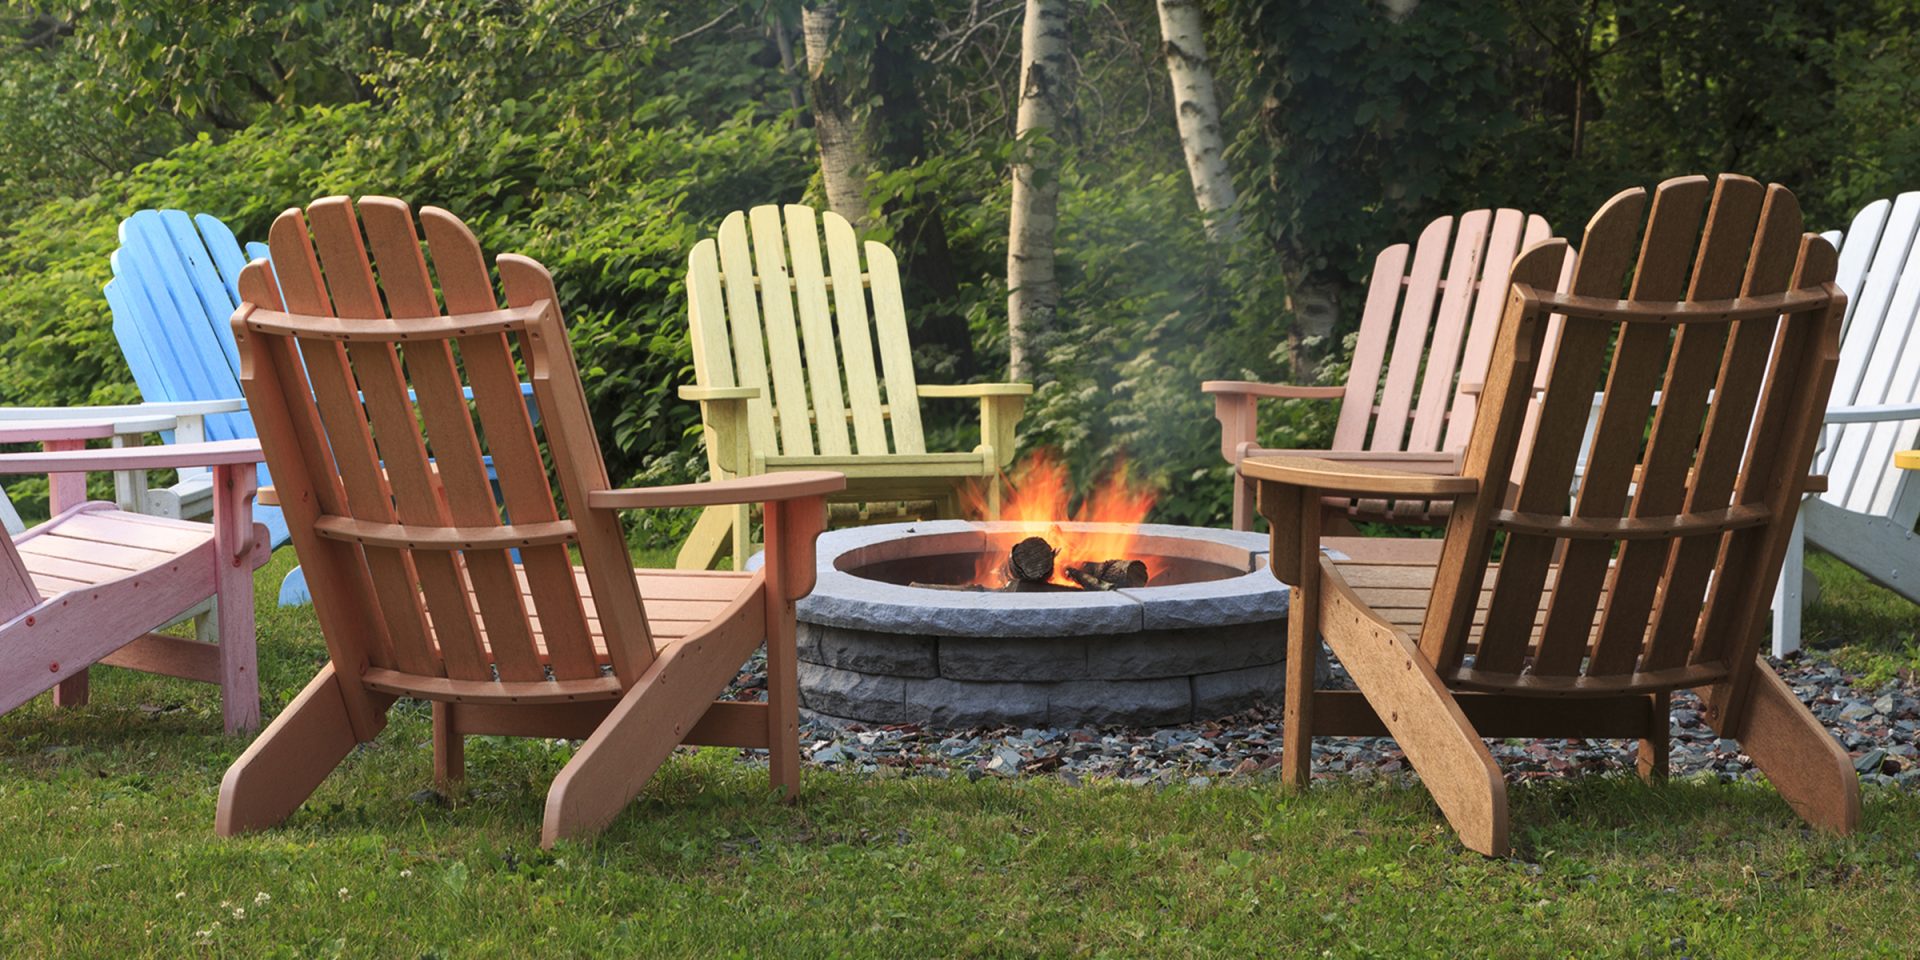 How To Build An Outdoor Fireplace, Outside Fire Pit